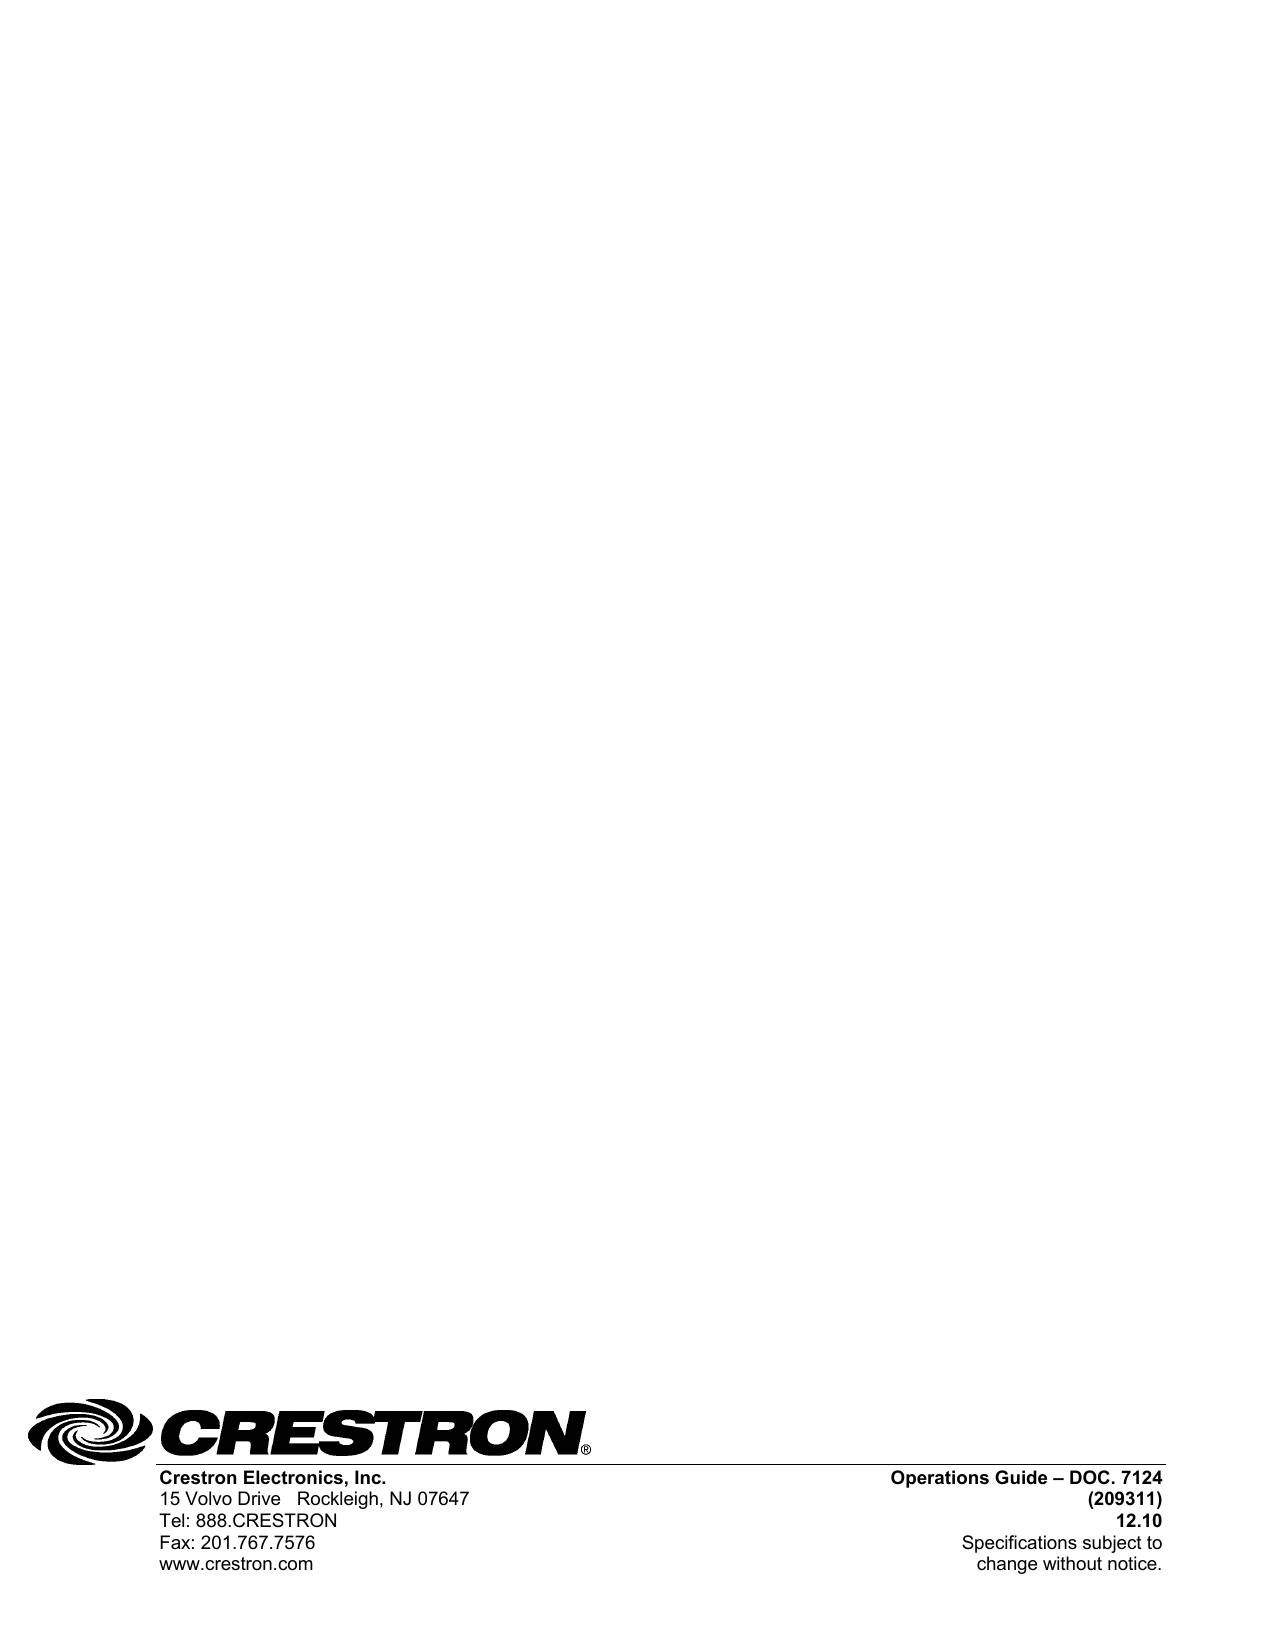   Crestron Electronics, Inc.  Operations Guide – DOC. 7124 15 Volvo Drive   Rockleigh, NJ 07647 (209311) Tel: 888.CRESTRON 12.10 Fax: 201.767.7576  Specifications subject to www.crestron.com  change without notice.  